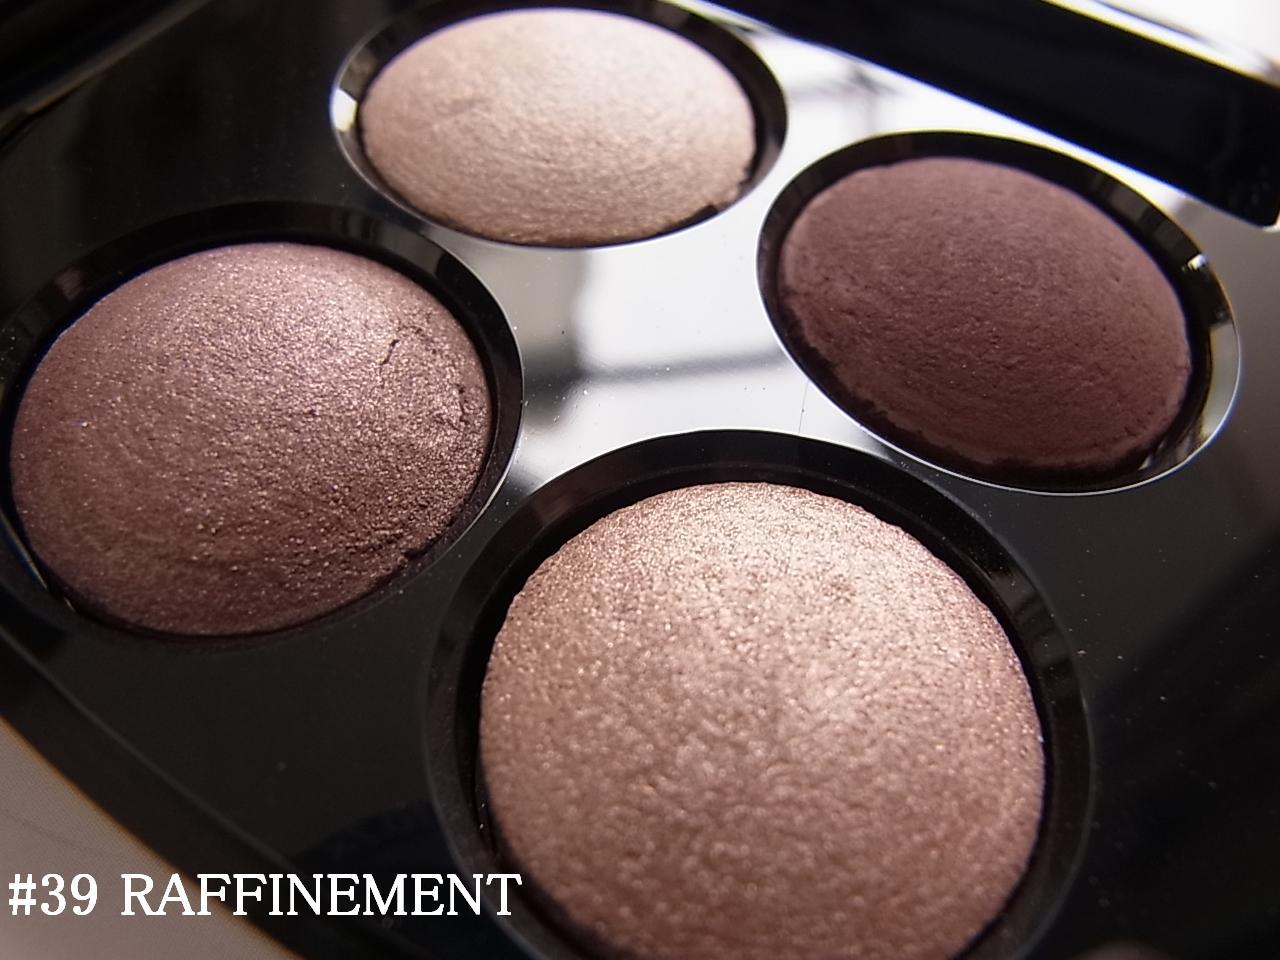 CHANEL】LES 4 OMBRES #39 RAFFINEMENT | atsuknさんのブログ - @cosme ...